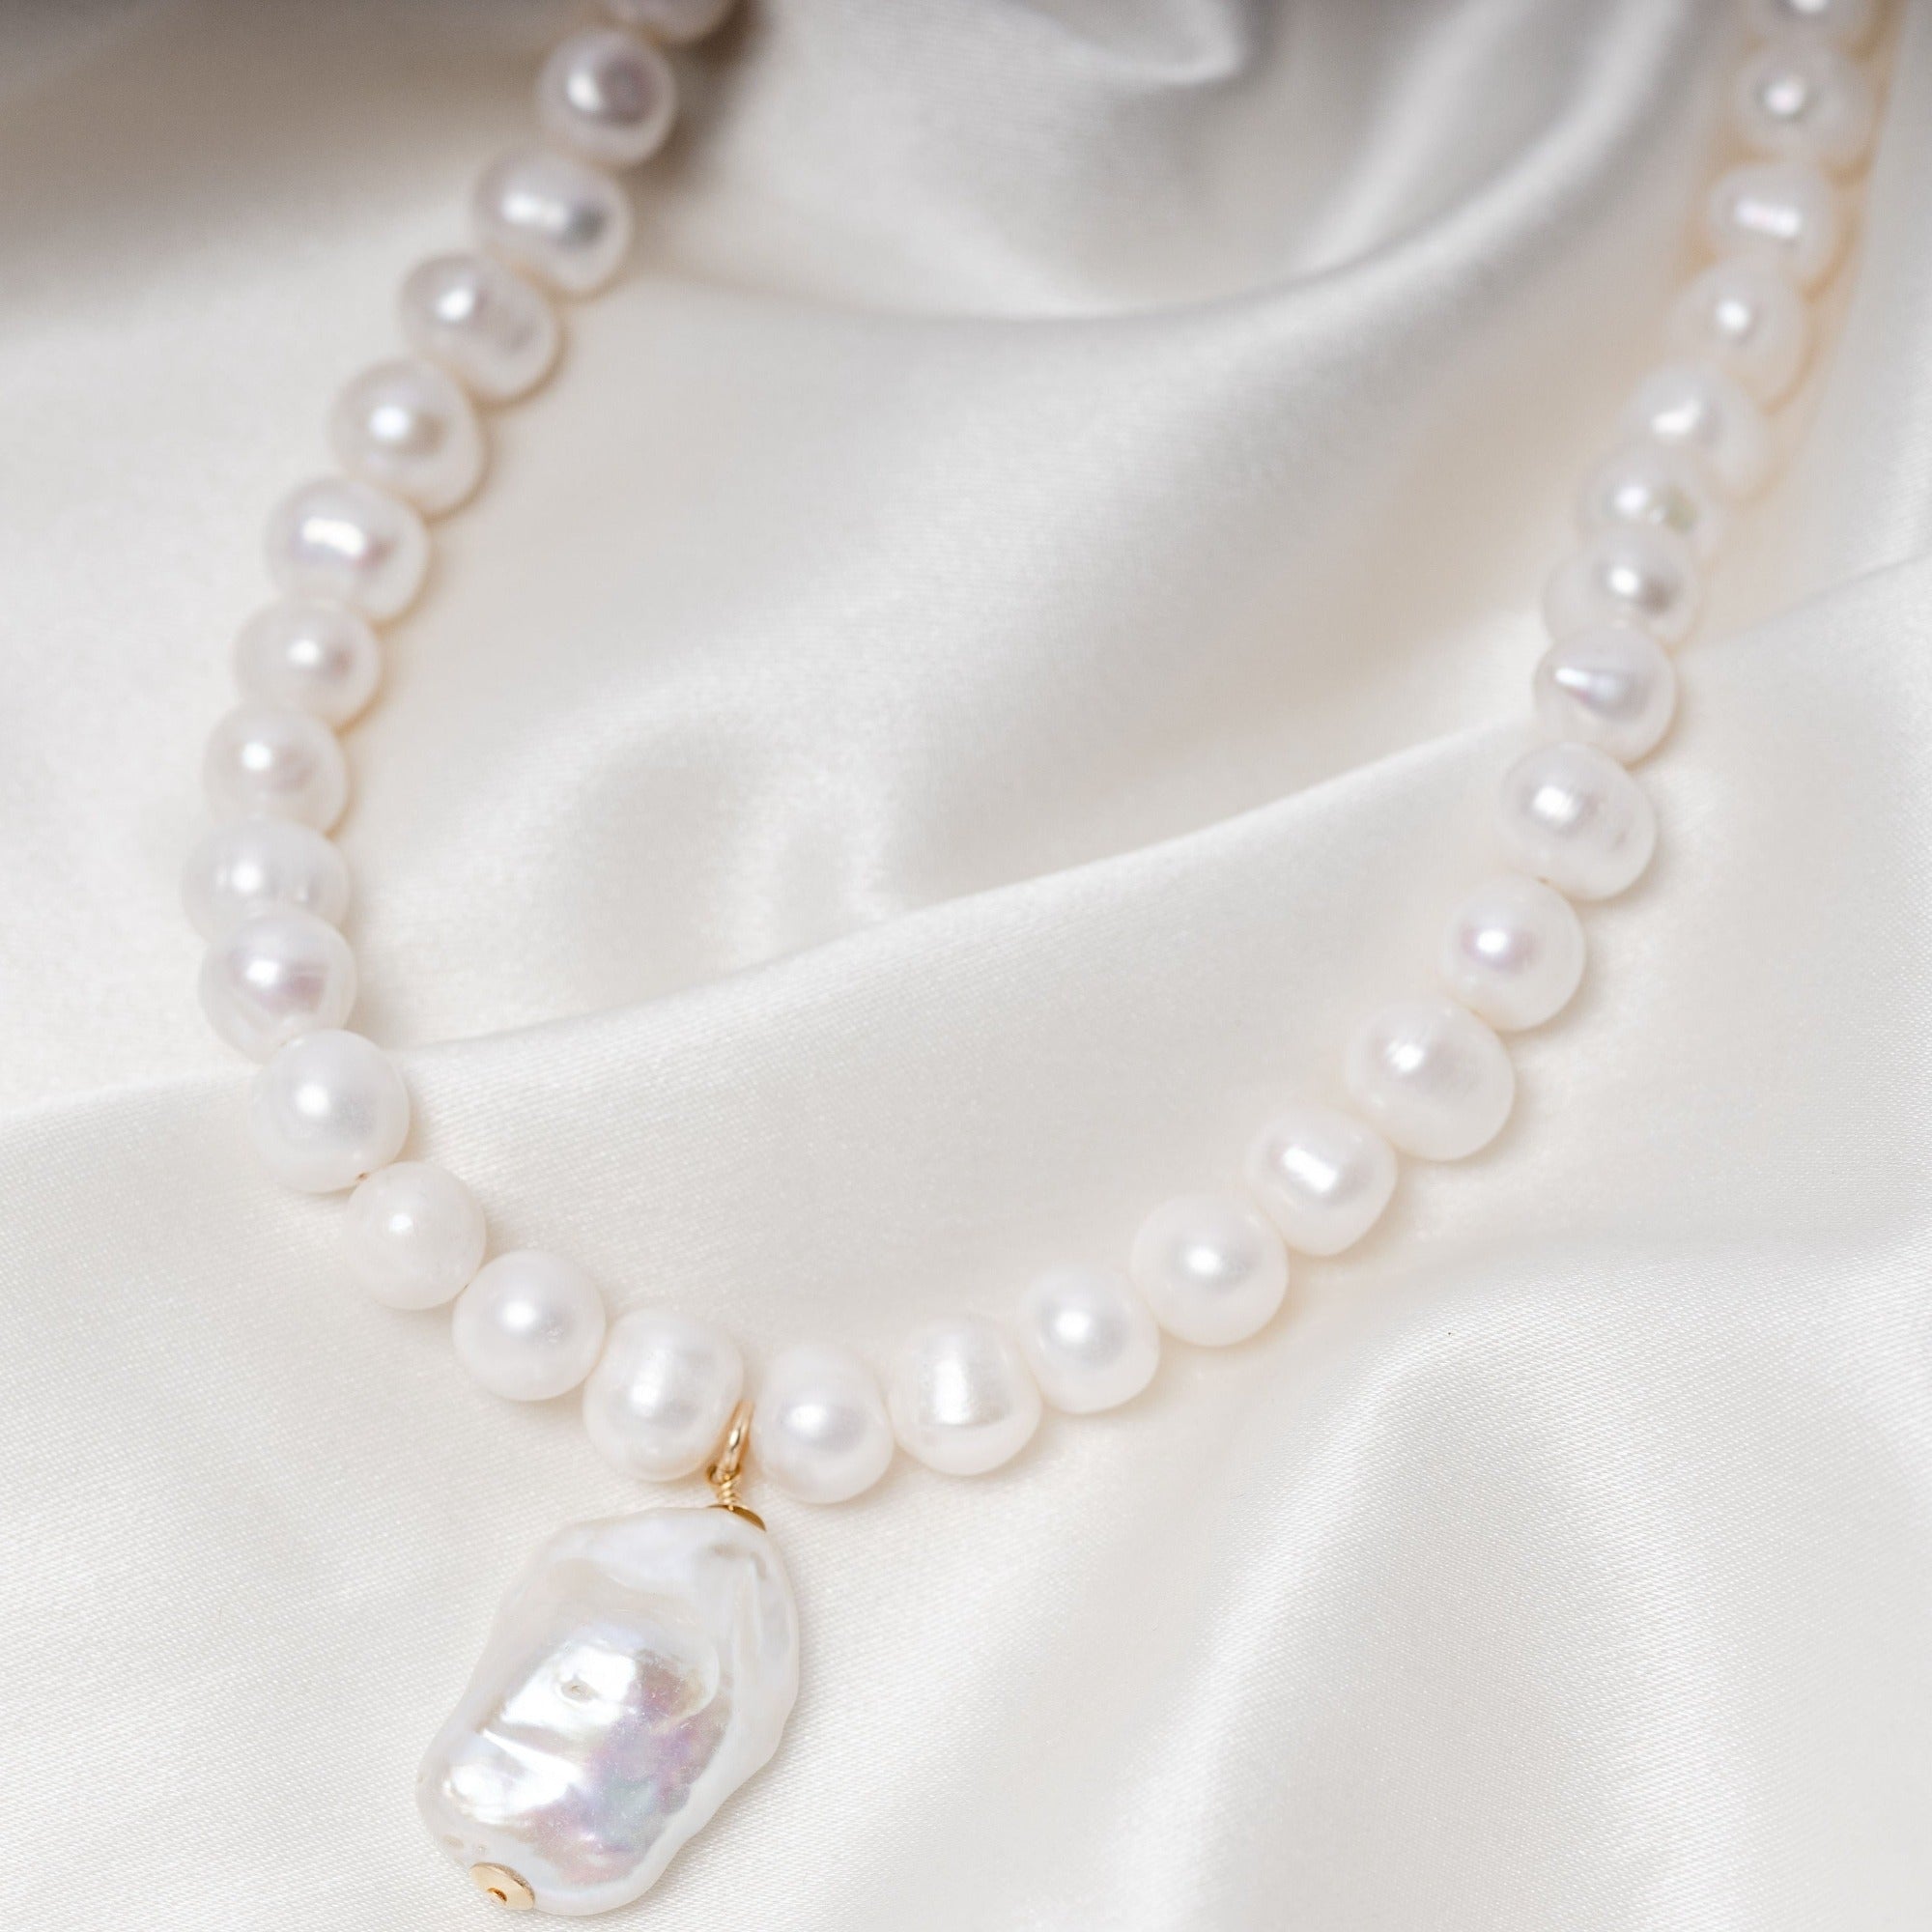 Riviera Pearl Necklace by Erin Fader Jewelry